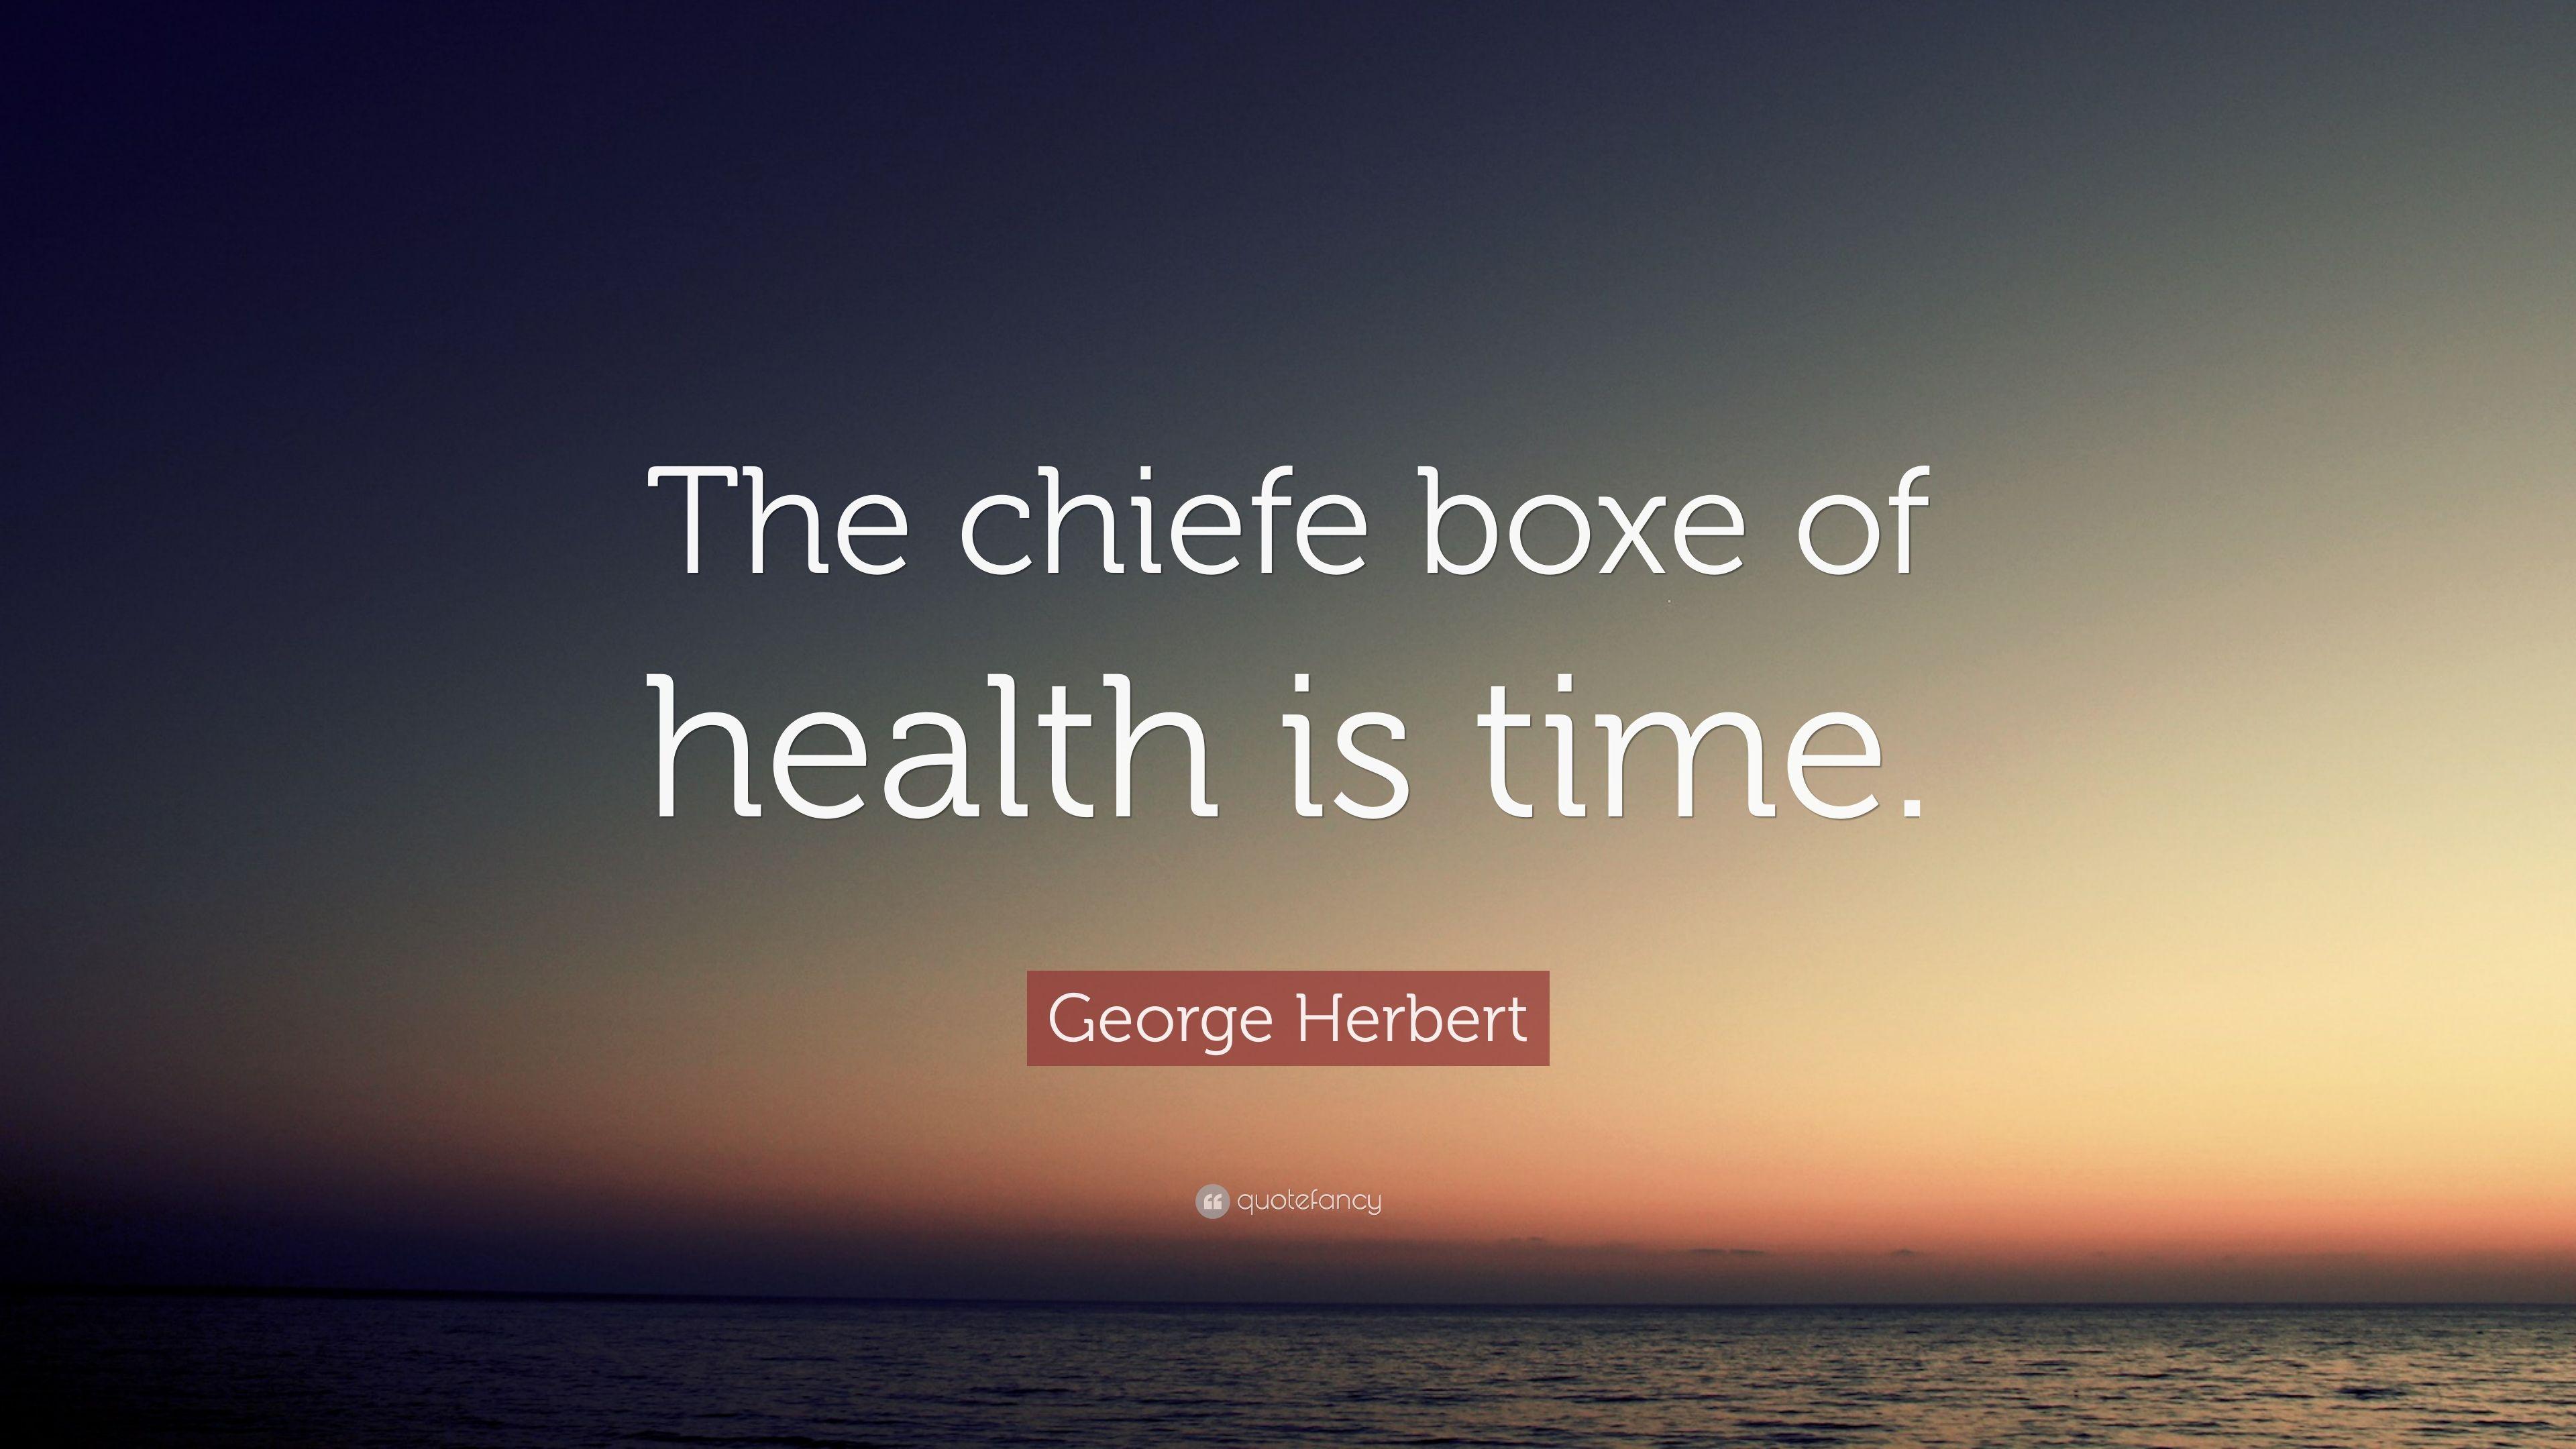 George Herbert Quote: “The chiefe boxe of health is time.” 7